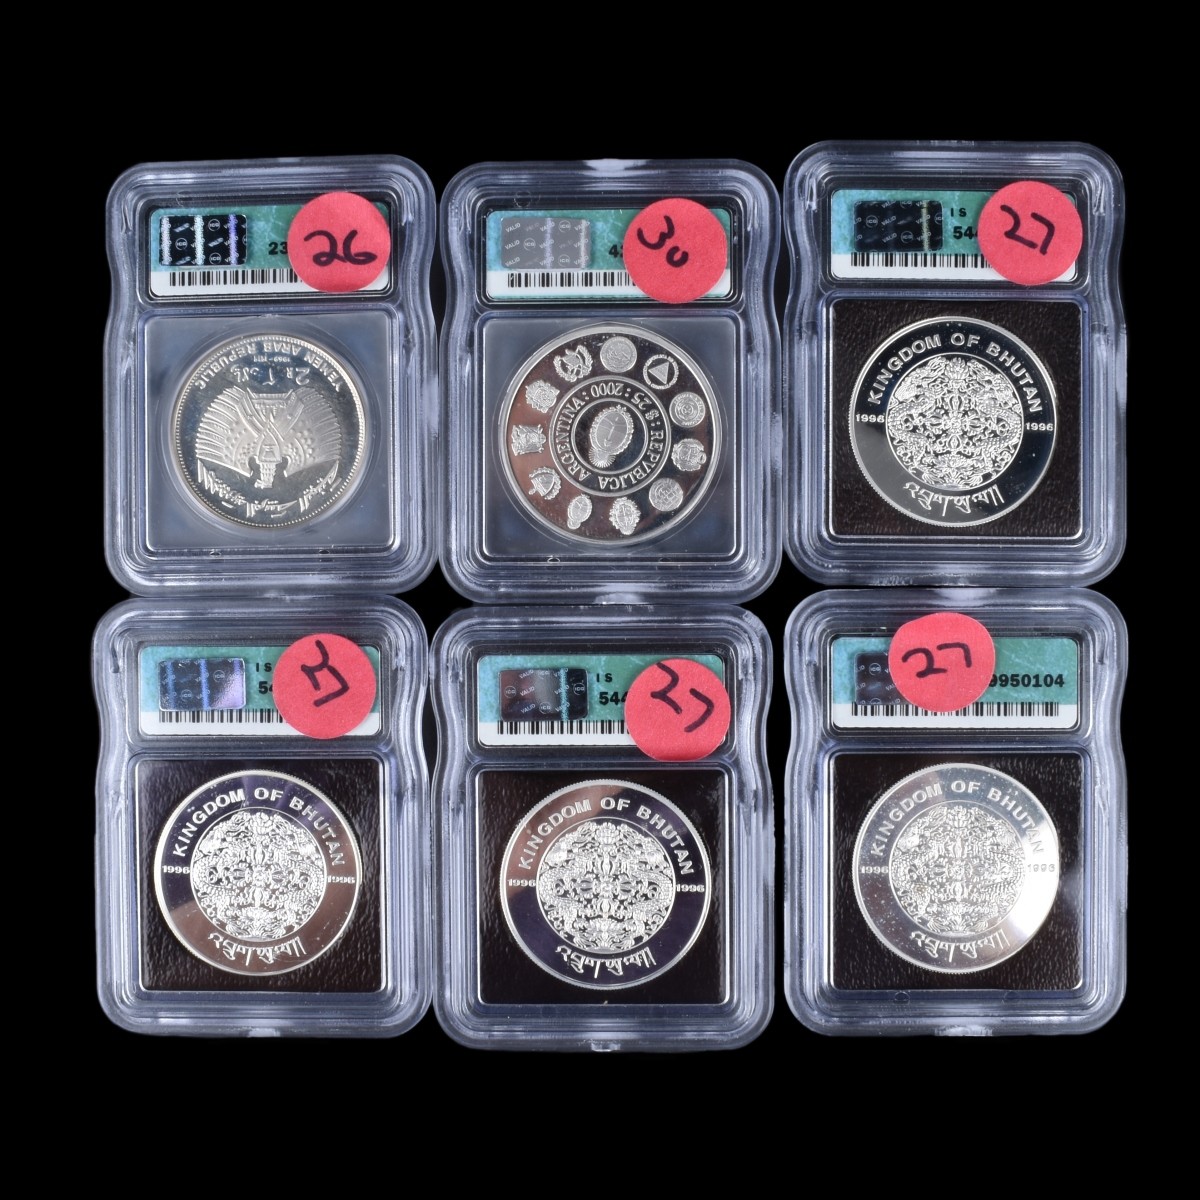 Six (6) Slabbed Coins